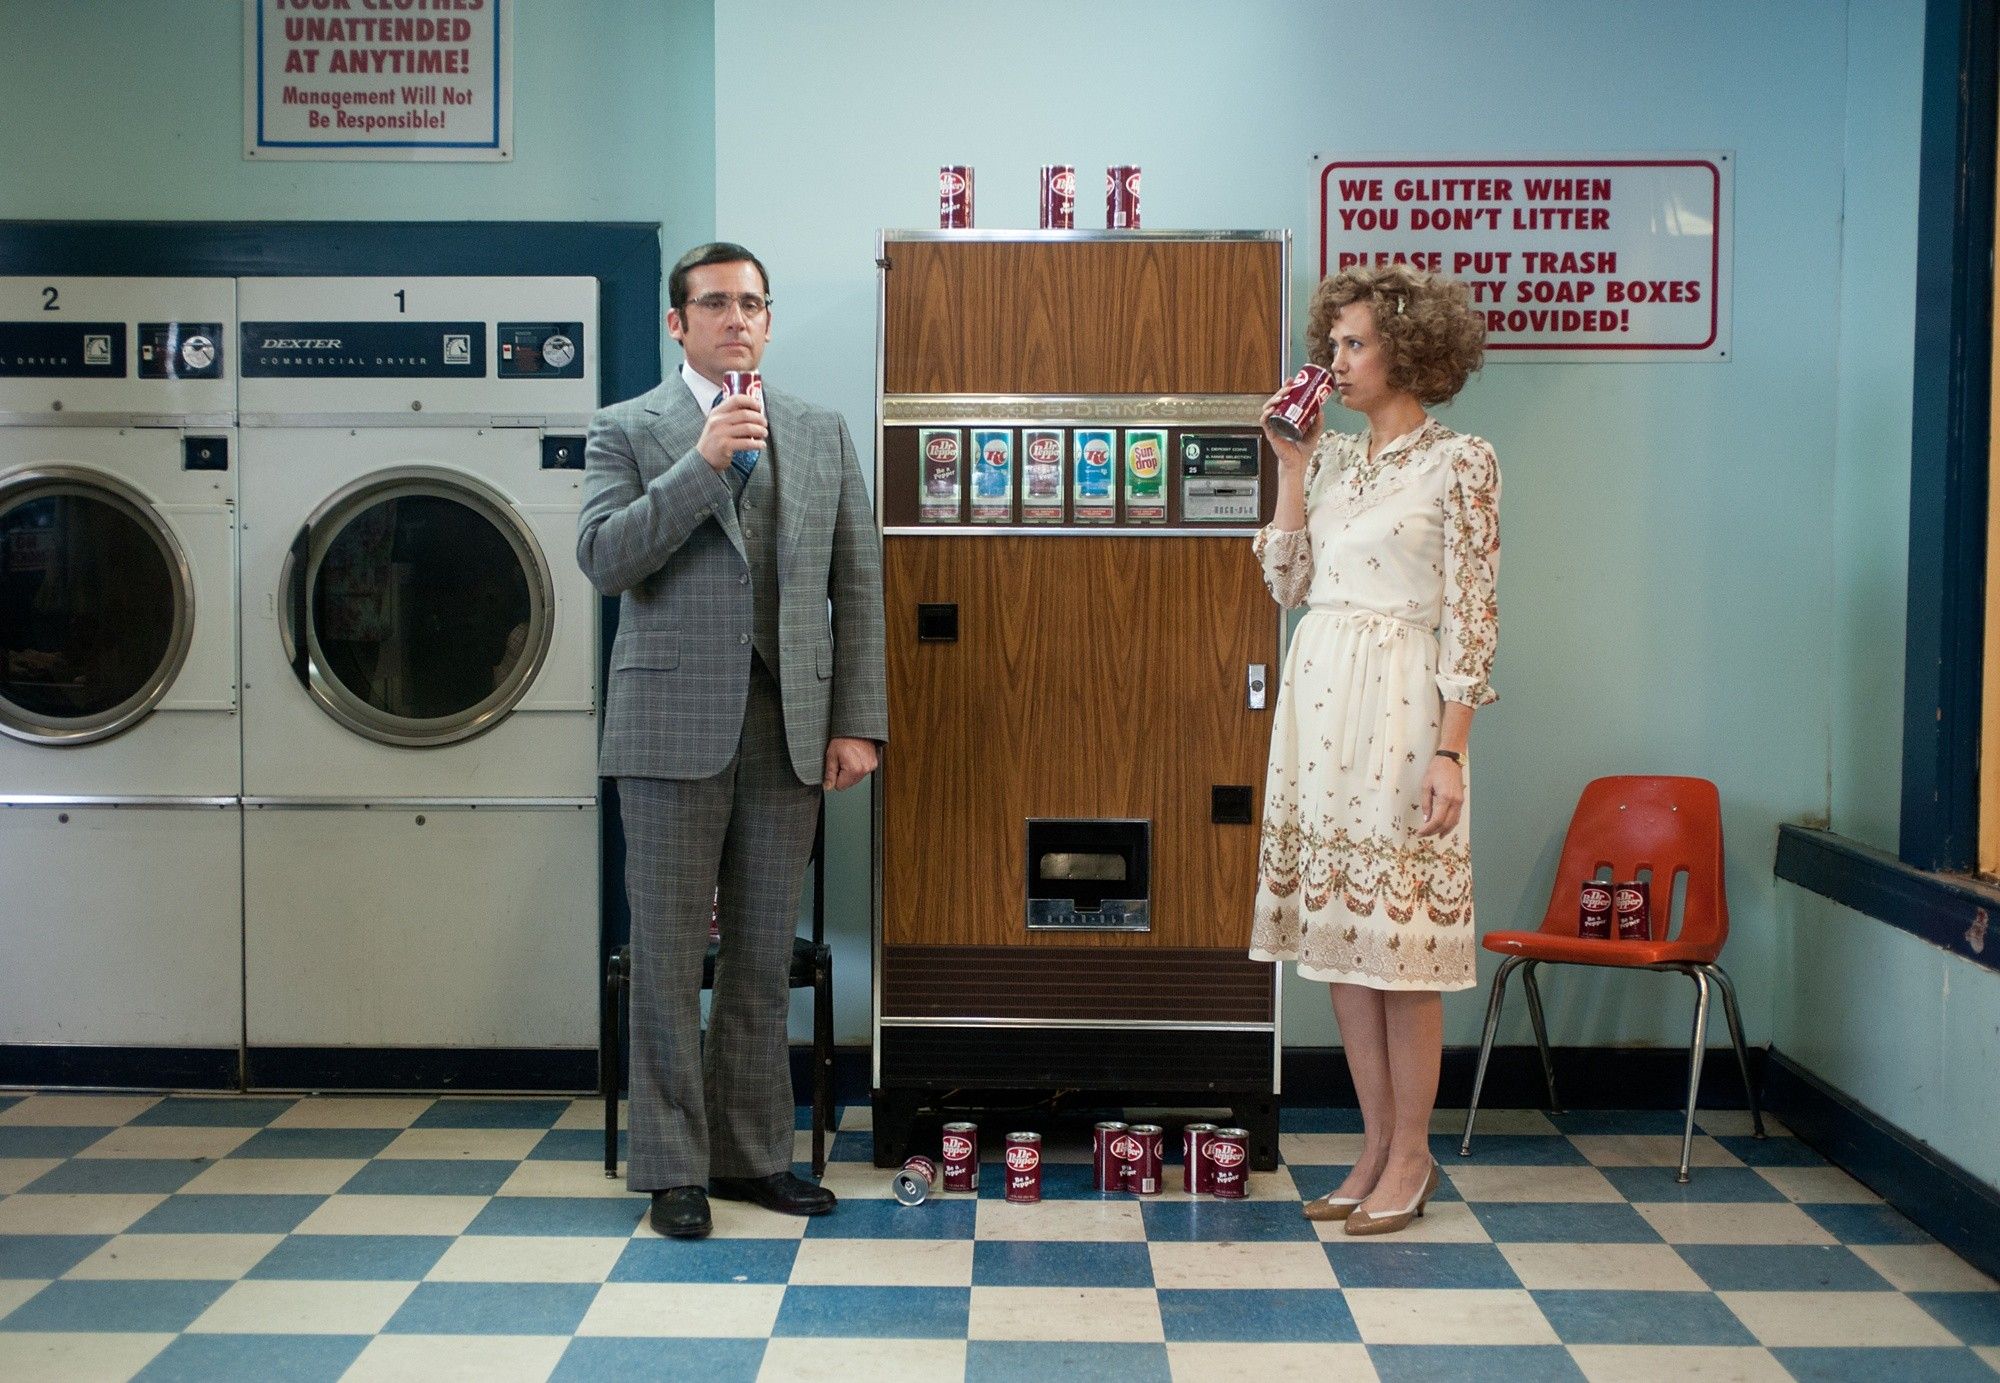 Steve Carell stars as Brick Tamland and Kristen Wiig stars as Chani in Paramount Pictures' Anchorman: The Legend Continues (2013)